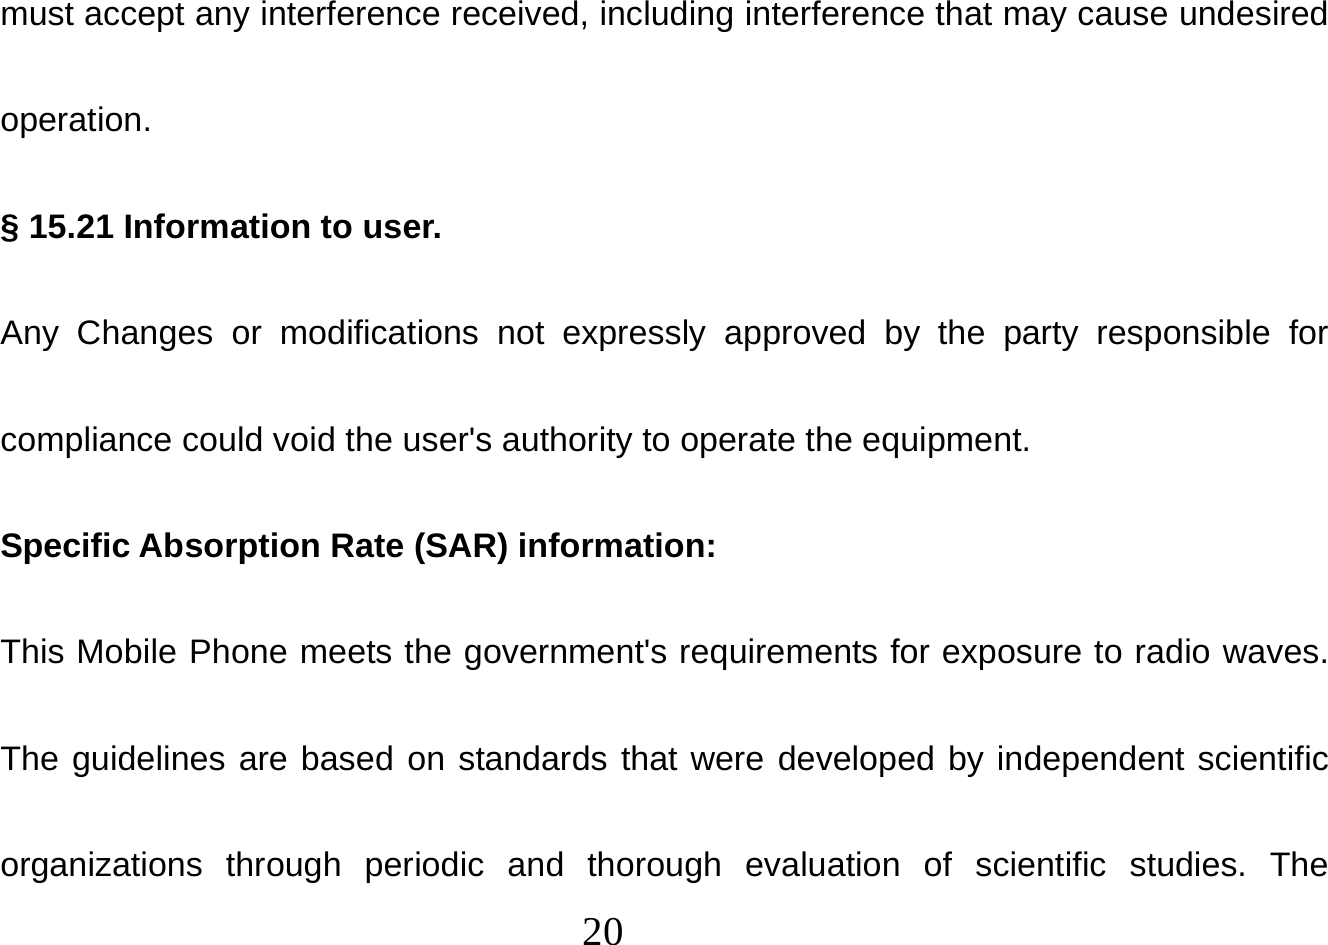  20  must accept any interference received, including interference that may cause undesired operation. § 15.21 Information to user. Any Changes or modifications not expressly approved by the party responsible for compliance could void the user&apos;s authority to operate the equipment. Specific Absorption Rate (SAR) information: This Mobile Phone meets the government&apos;s requirements for exposure to radio waves. The guidelines are based on standards that were developed by independent scientific organizations through periodic and thorough evaluation of scientific studies. The 